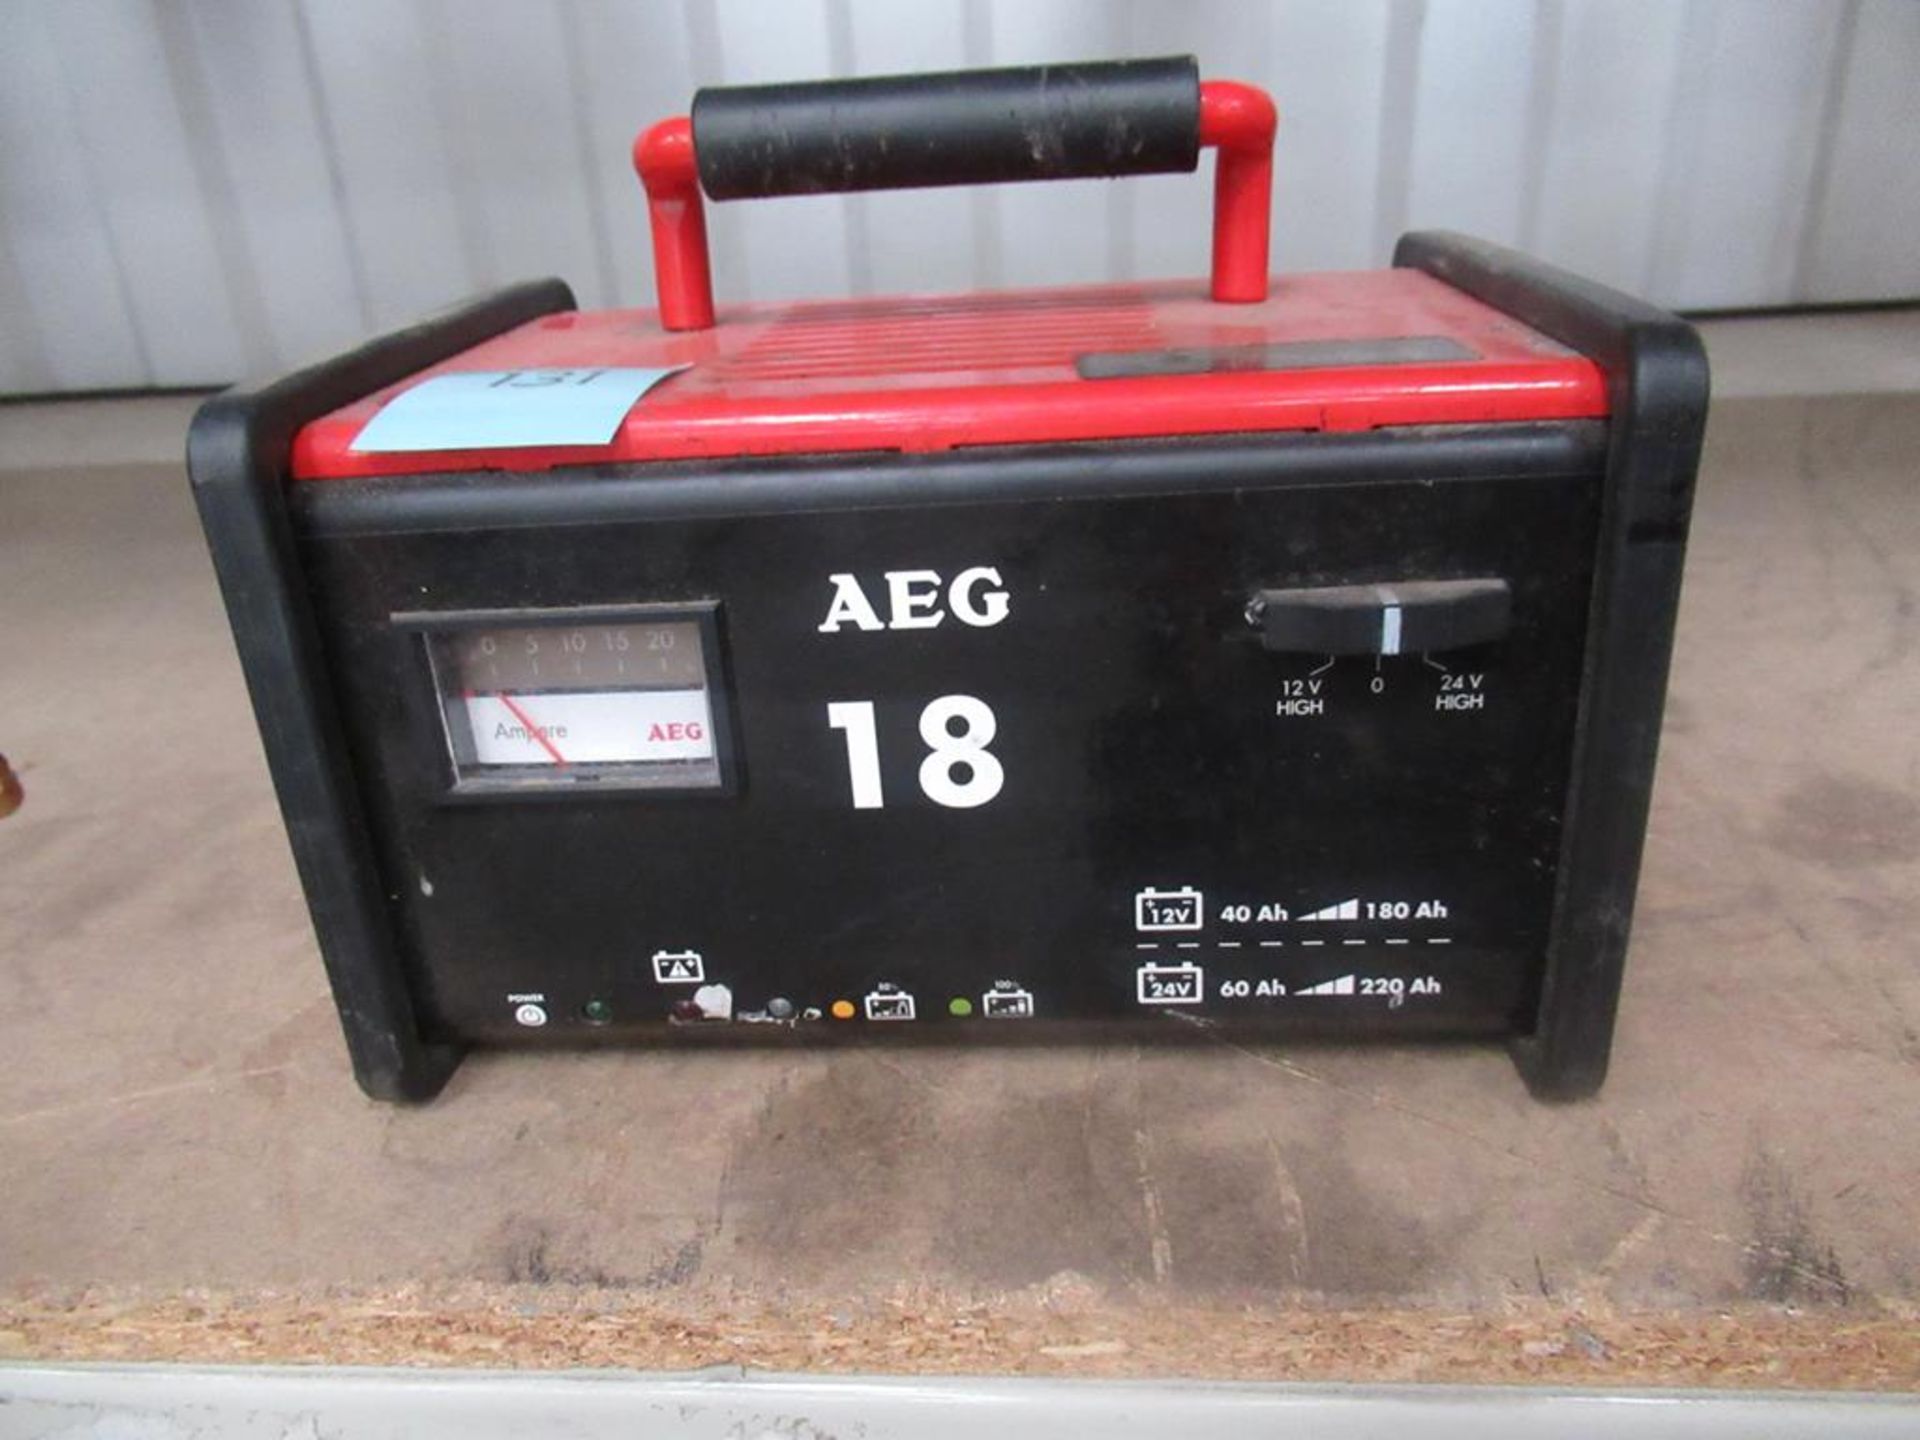 AEG 18 battery charger - Image 2 of 2